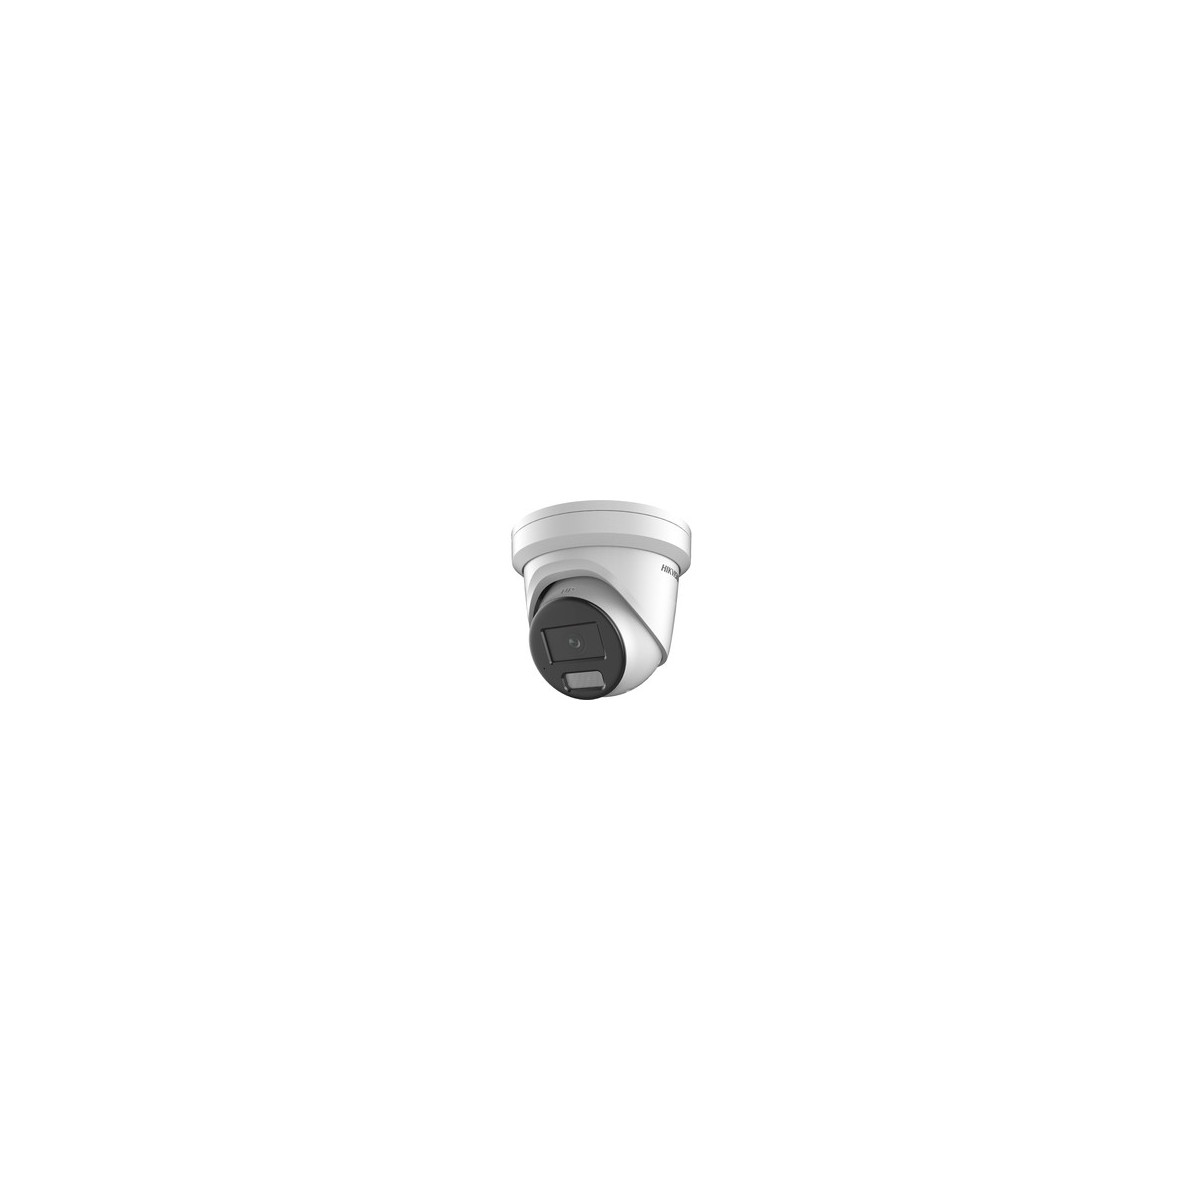 Hikvision Digital Technology DS-2CD2327G2-LU(2.8mm)(C) - IP security camera - Indoor  outdoor - Wired - Multi - FCC SDoC (47 CFR